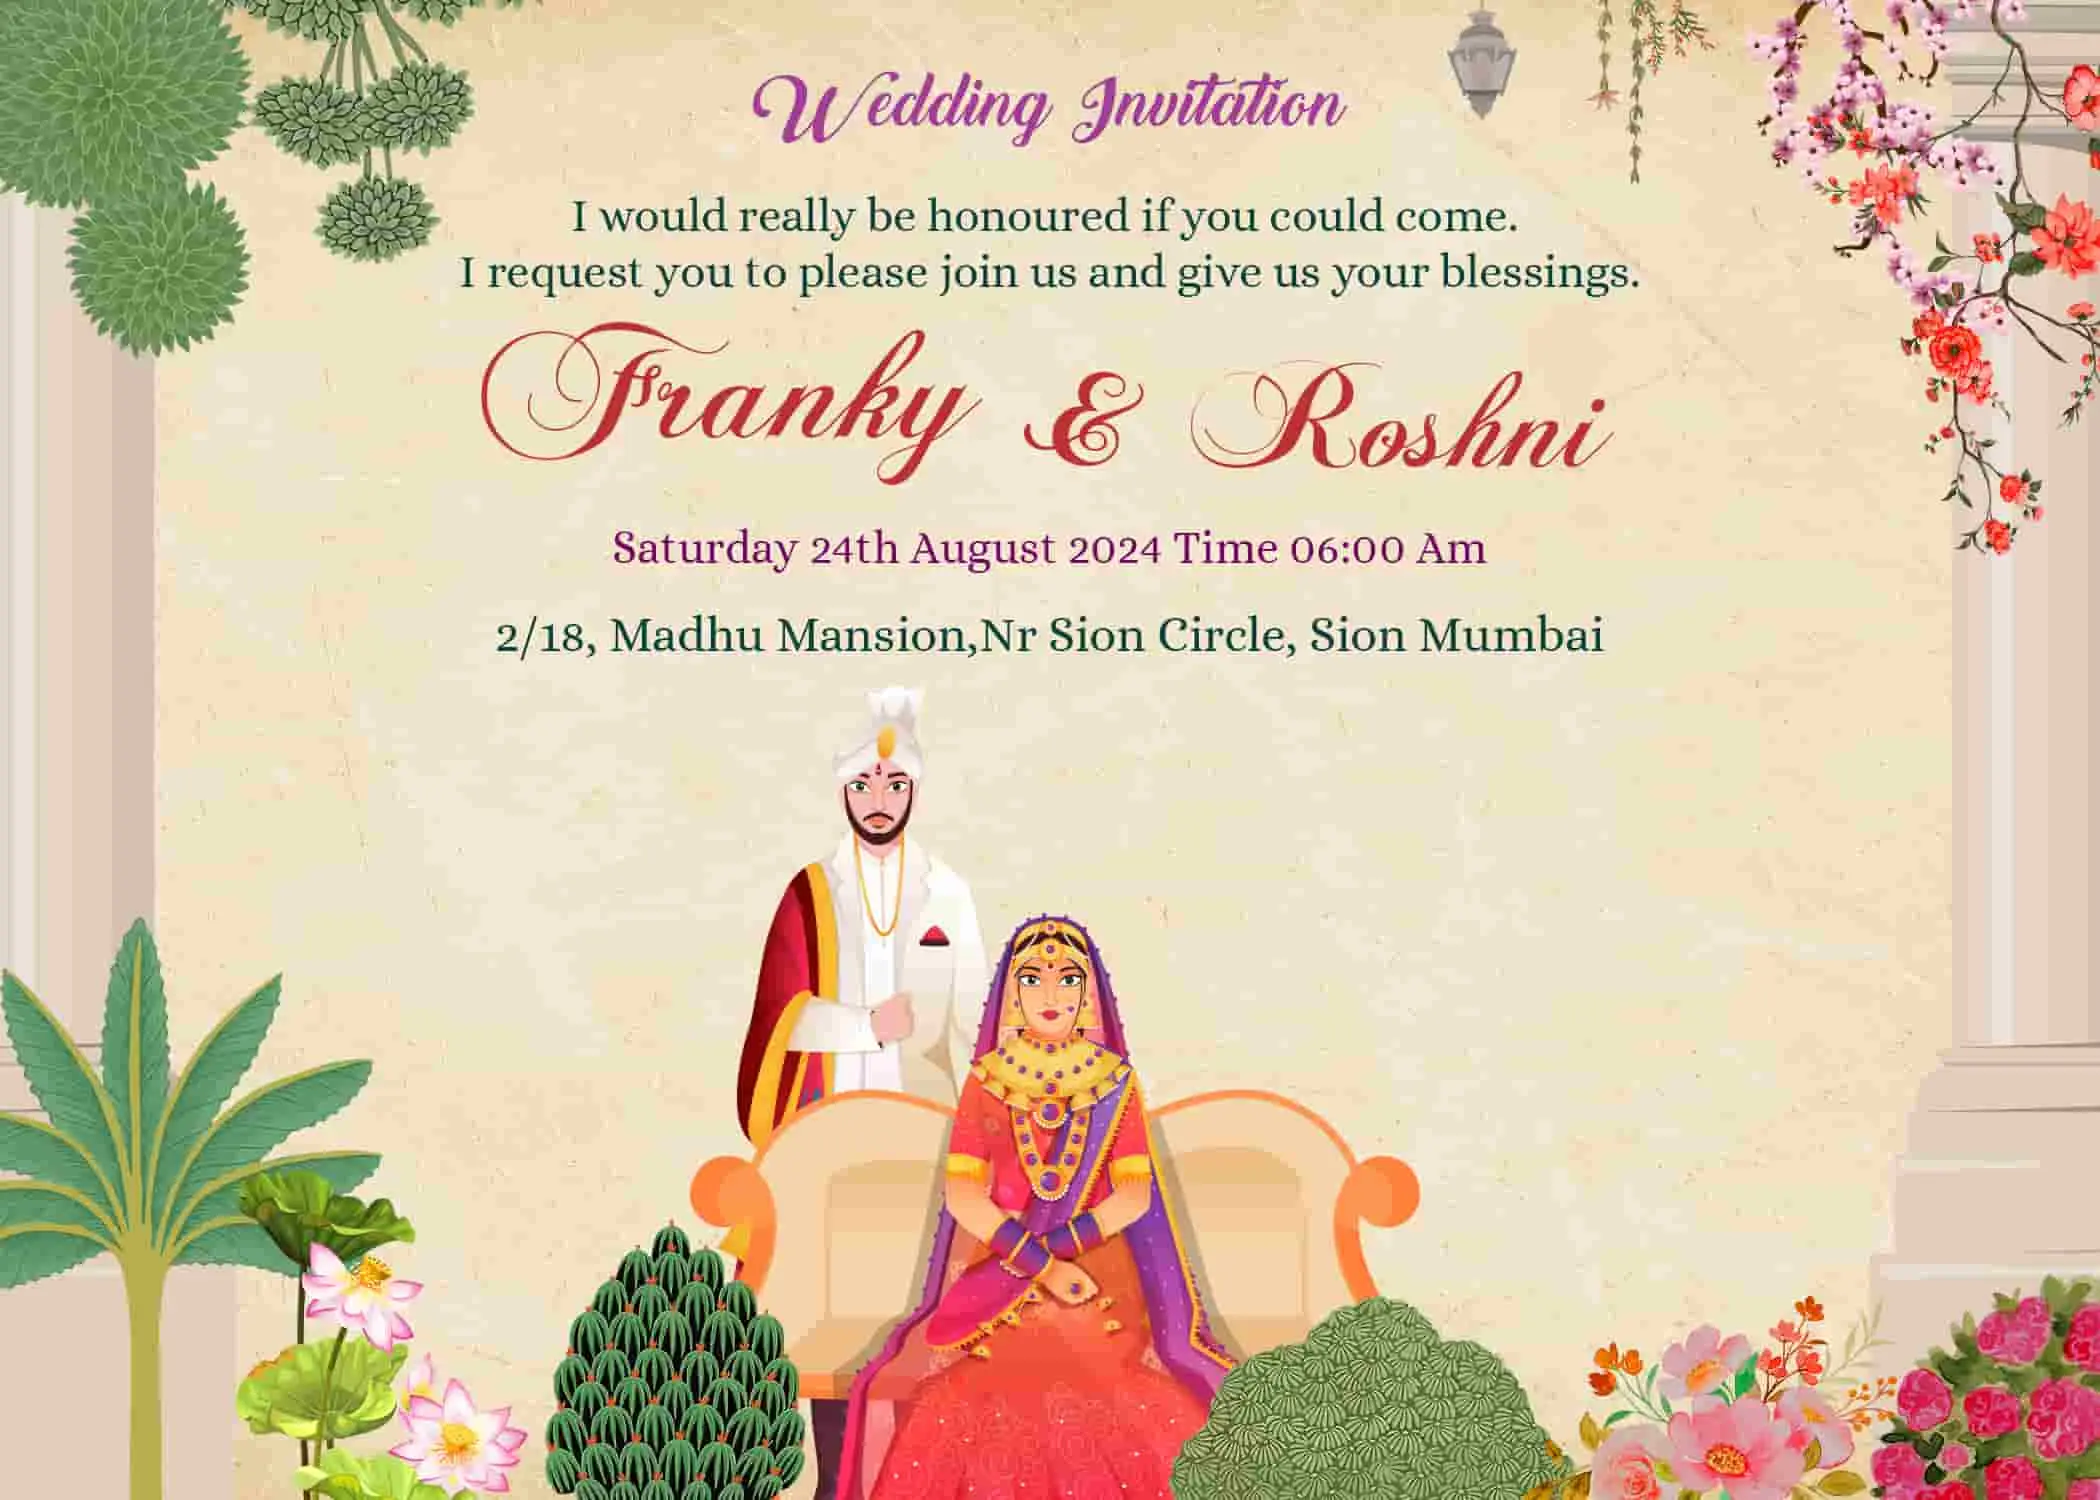 Top 7 Best E-Invitations for Wedding By Using Crafty Art